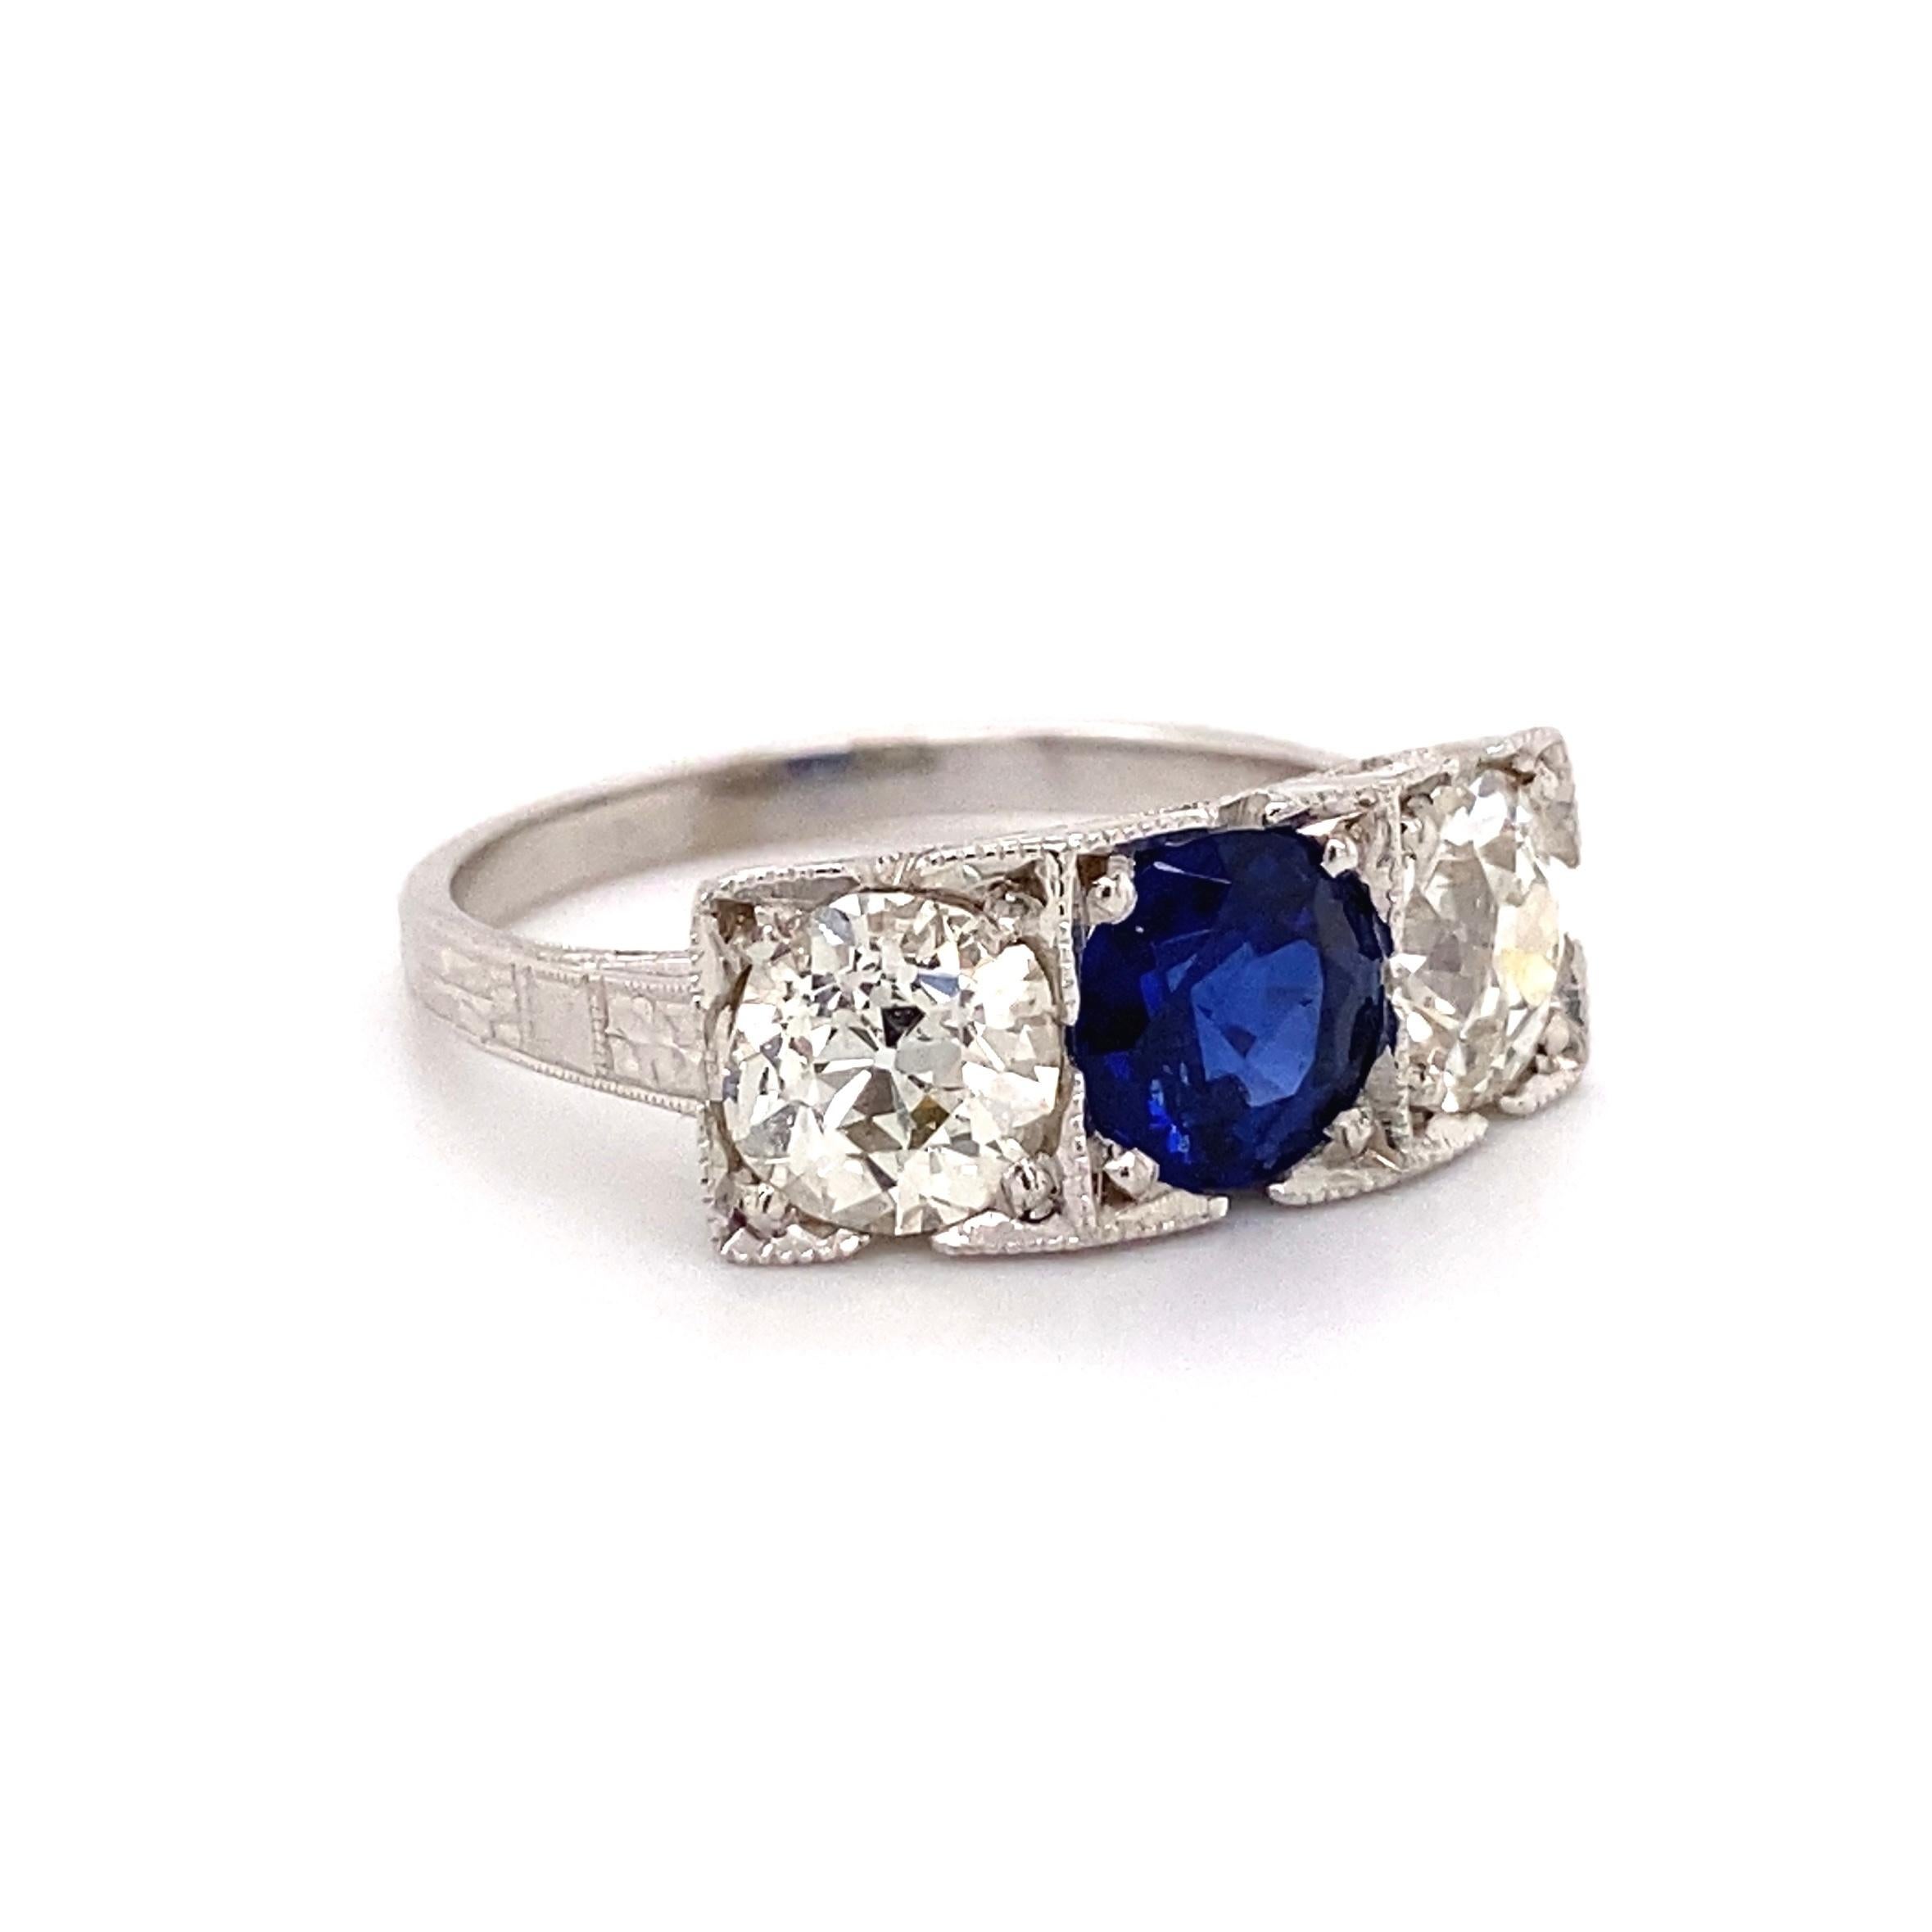 Simply Beautiful! Finely crafted Three Stone Sapphire and Diamond Ring. Centering a Hand set securely nestled Blue Sapphire, eye clean and bright, weighing approx. 1.40 Carat with a Diamond on either side; approx. 0.97 Carat and 1.00 Carat.; I-J